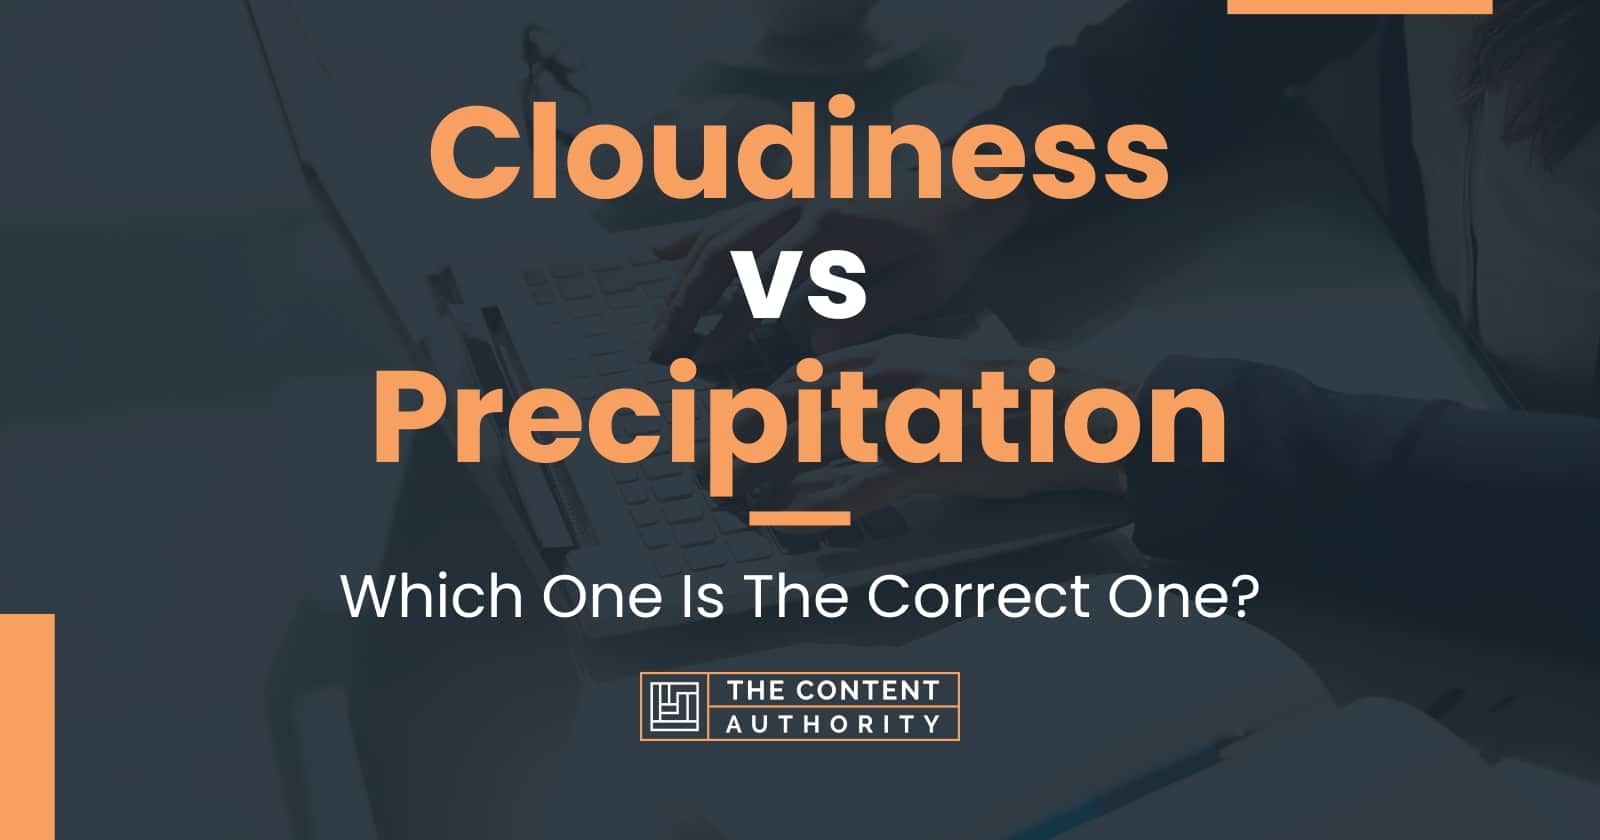 Cloudiness vs Precipitation: Which One Is The Correct One?